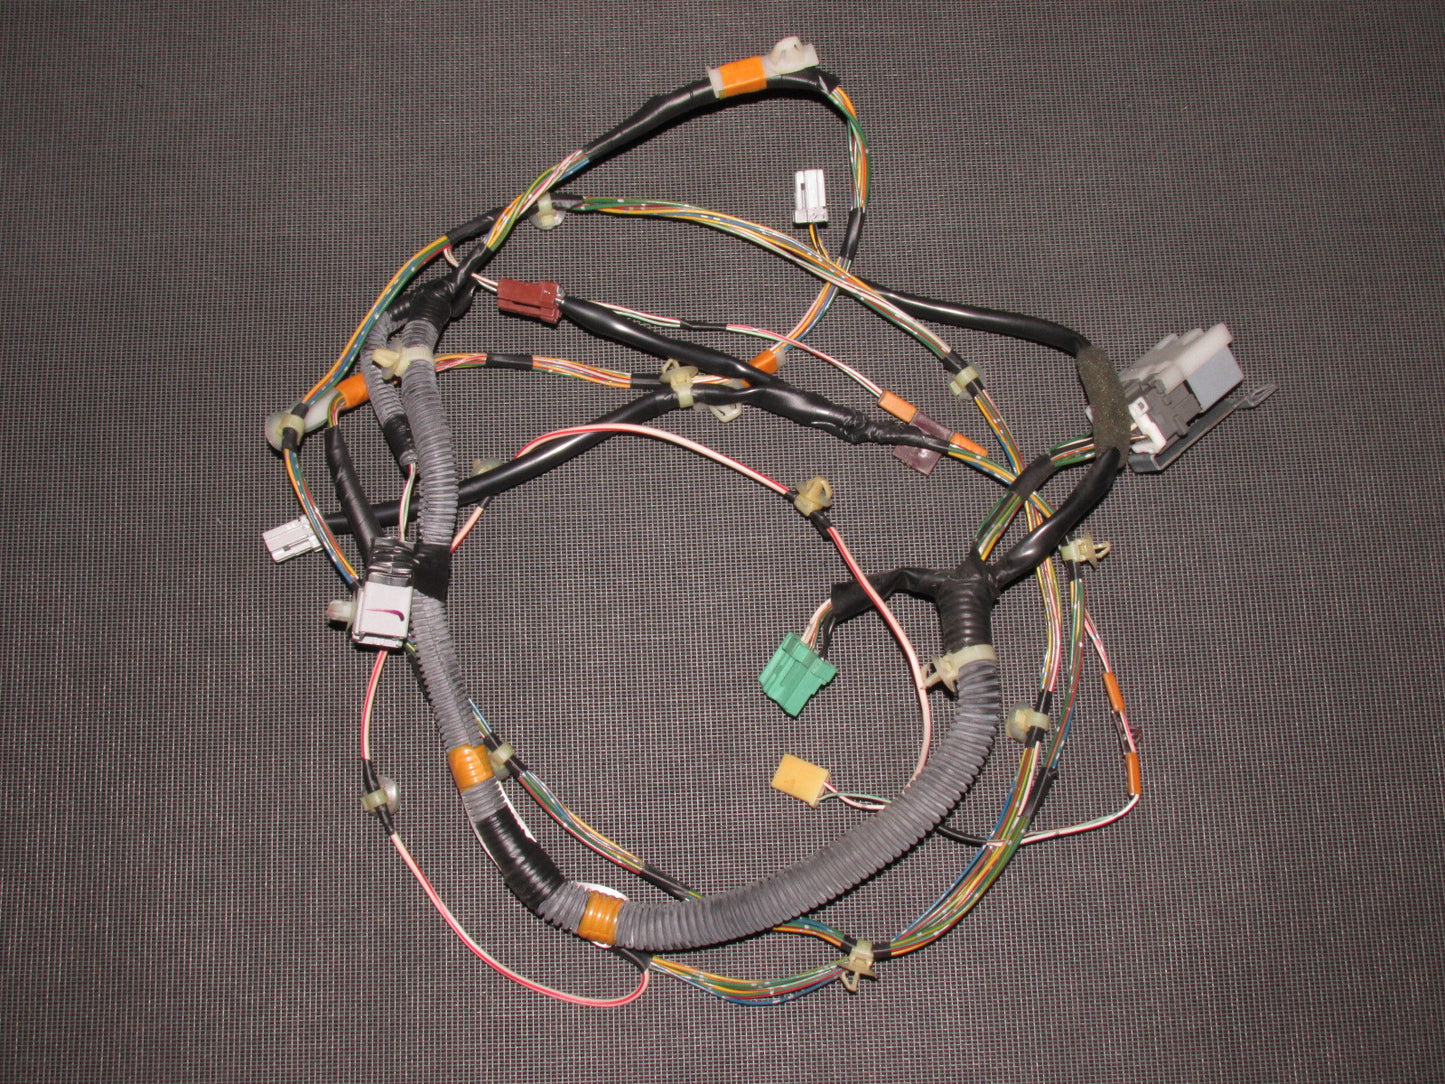 96 97 98 99 00 Honda Civic Coupe Sunroof & Dome Light Wiring Harness